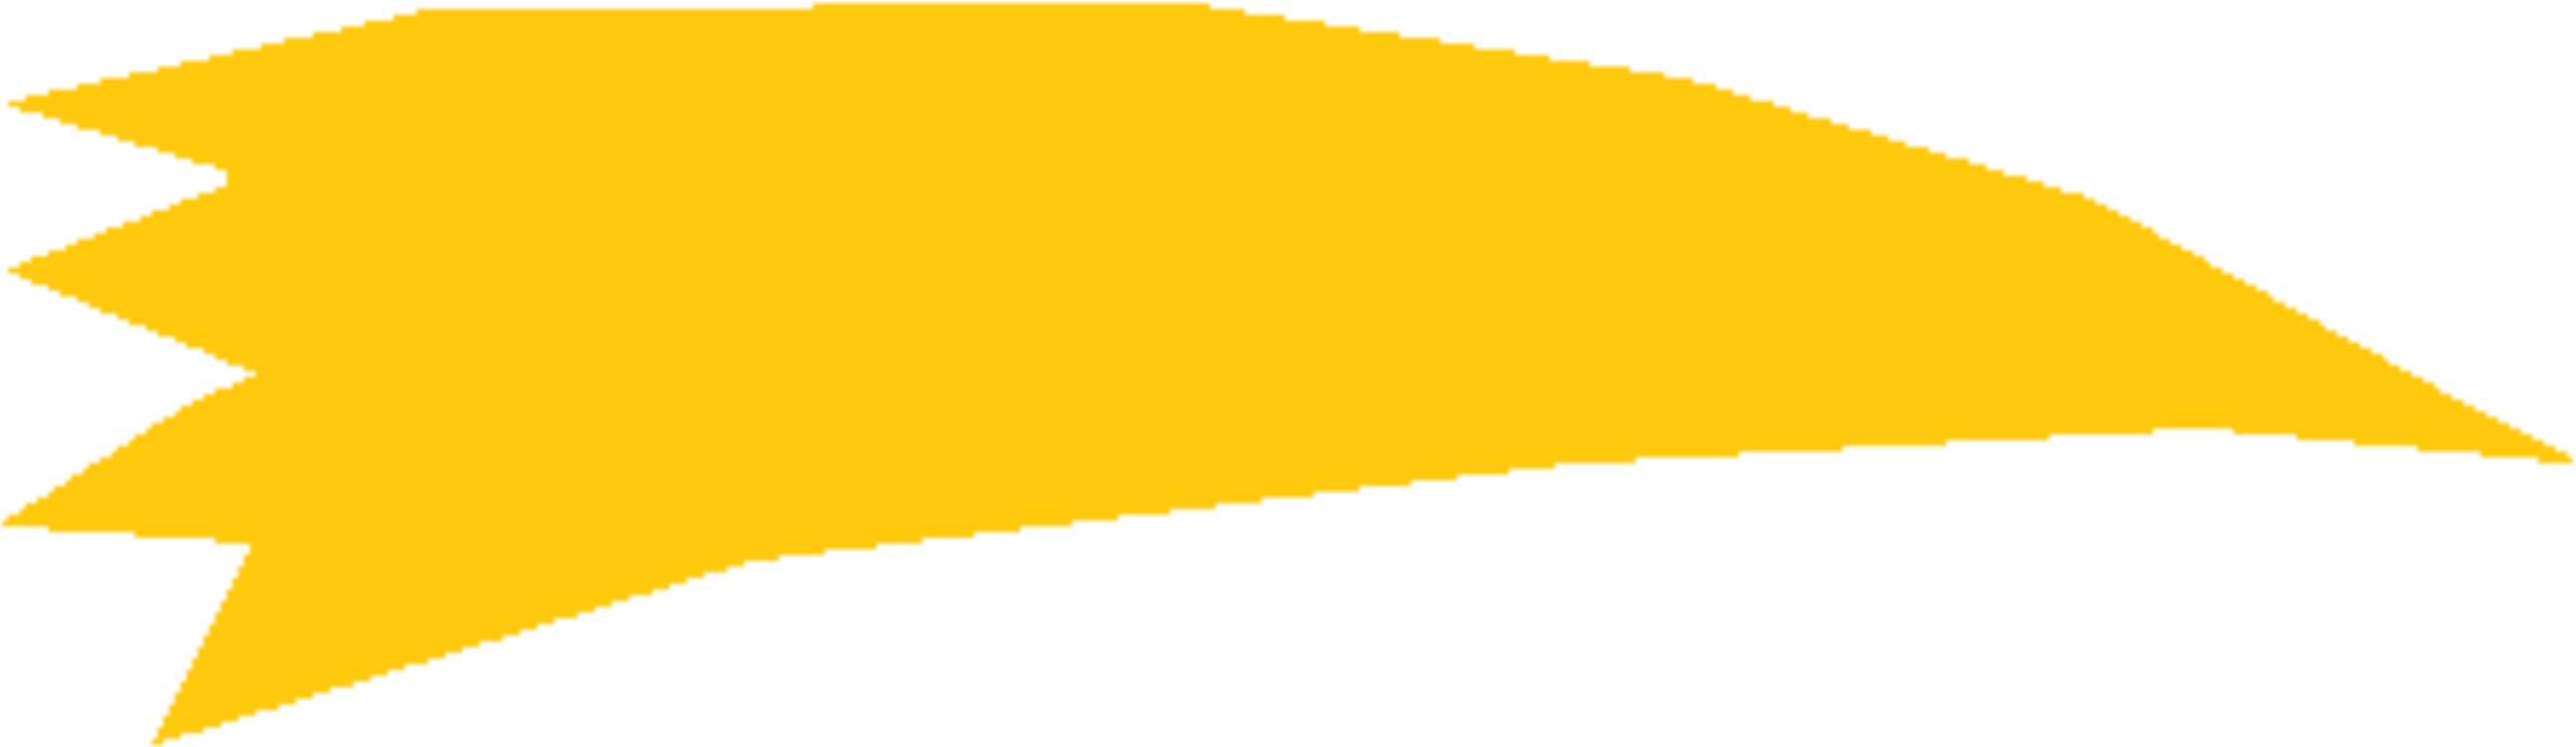 A Yellow And Black Rectangle